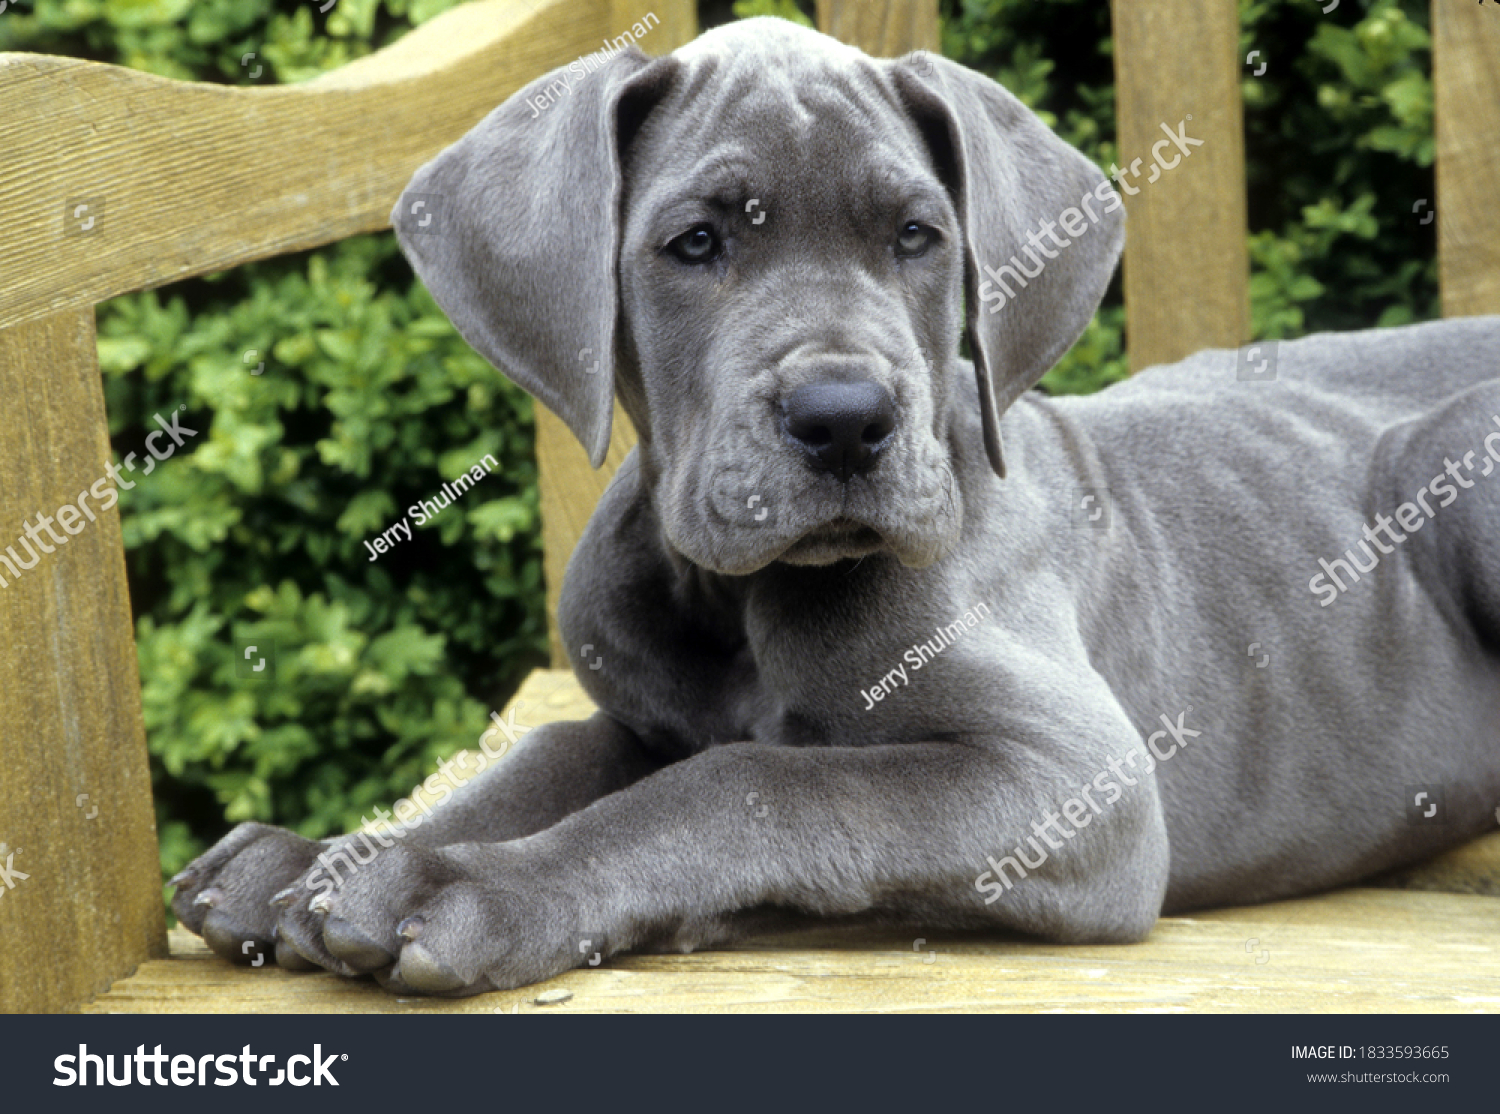 Great Dane Puppy lying on wooden bench, facing forward. #1833593665